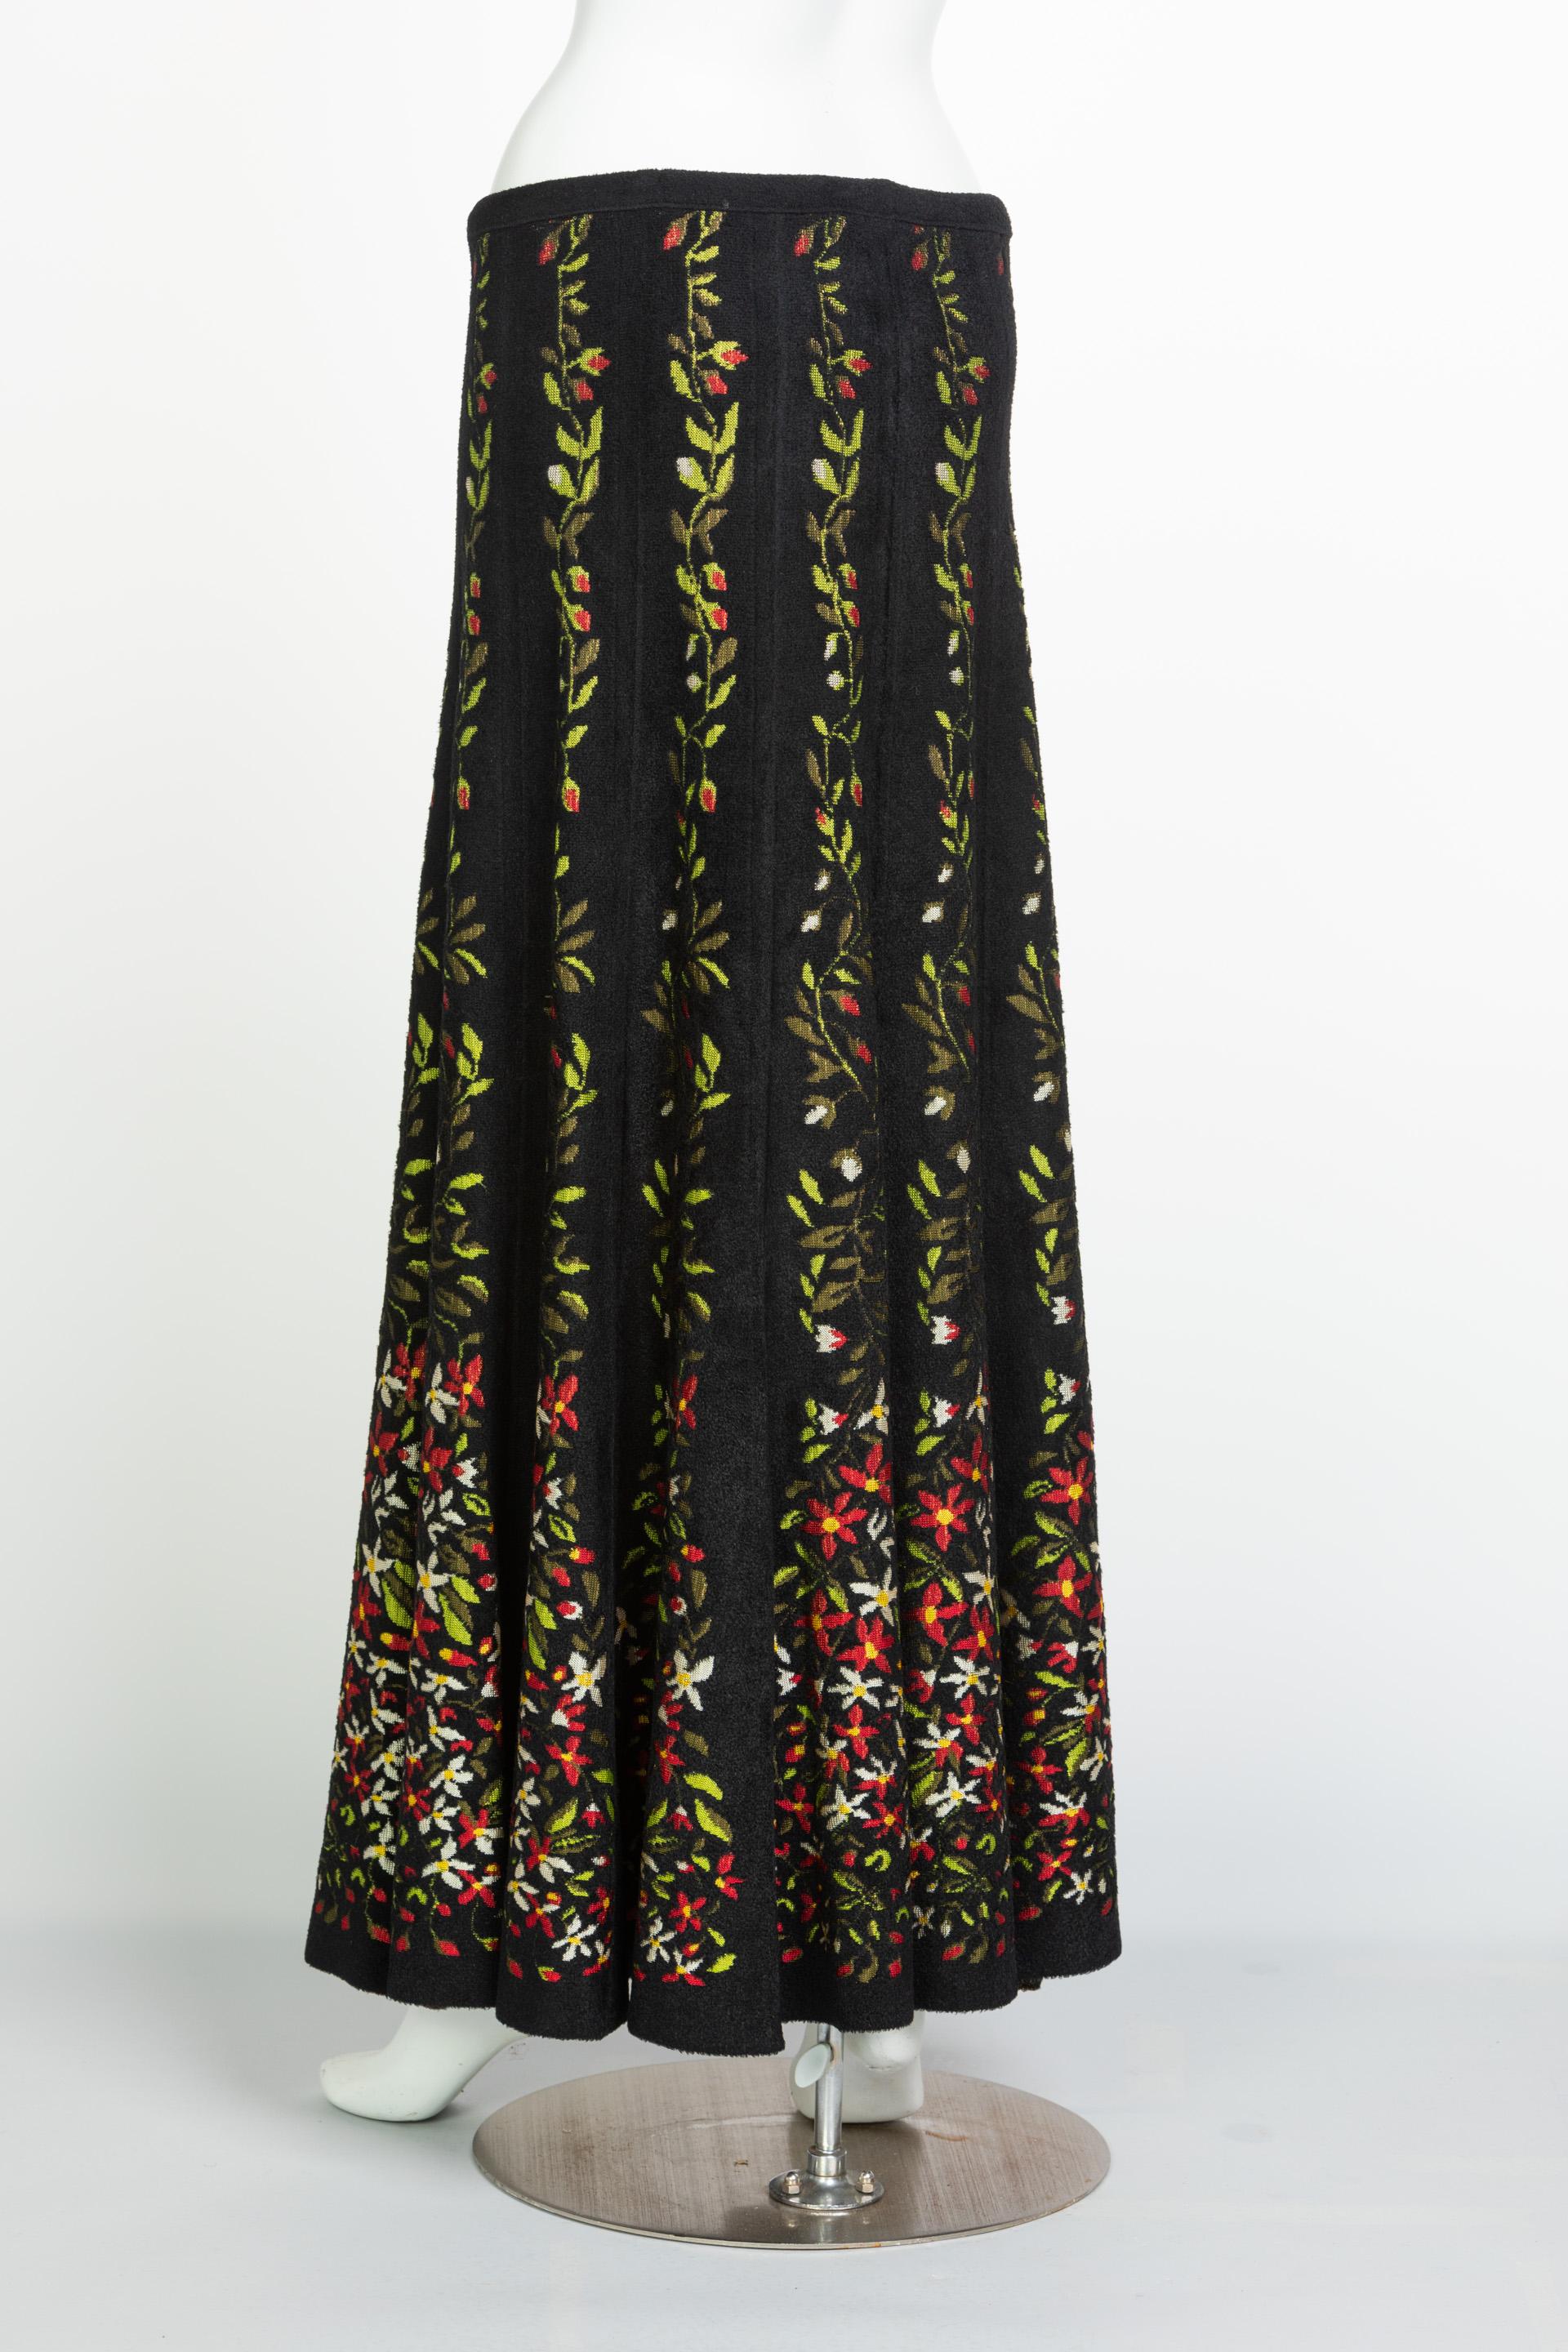 Vintage Azzedine Alaïa Balck Floral Chenille Maxi Skirt Documented Fall 2000 In Good Condition For Sale In Boca Raton, FL